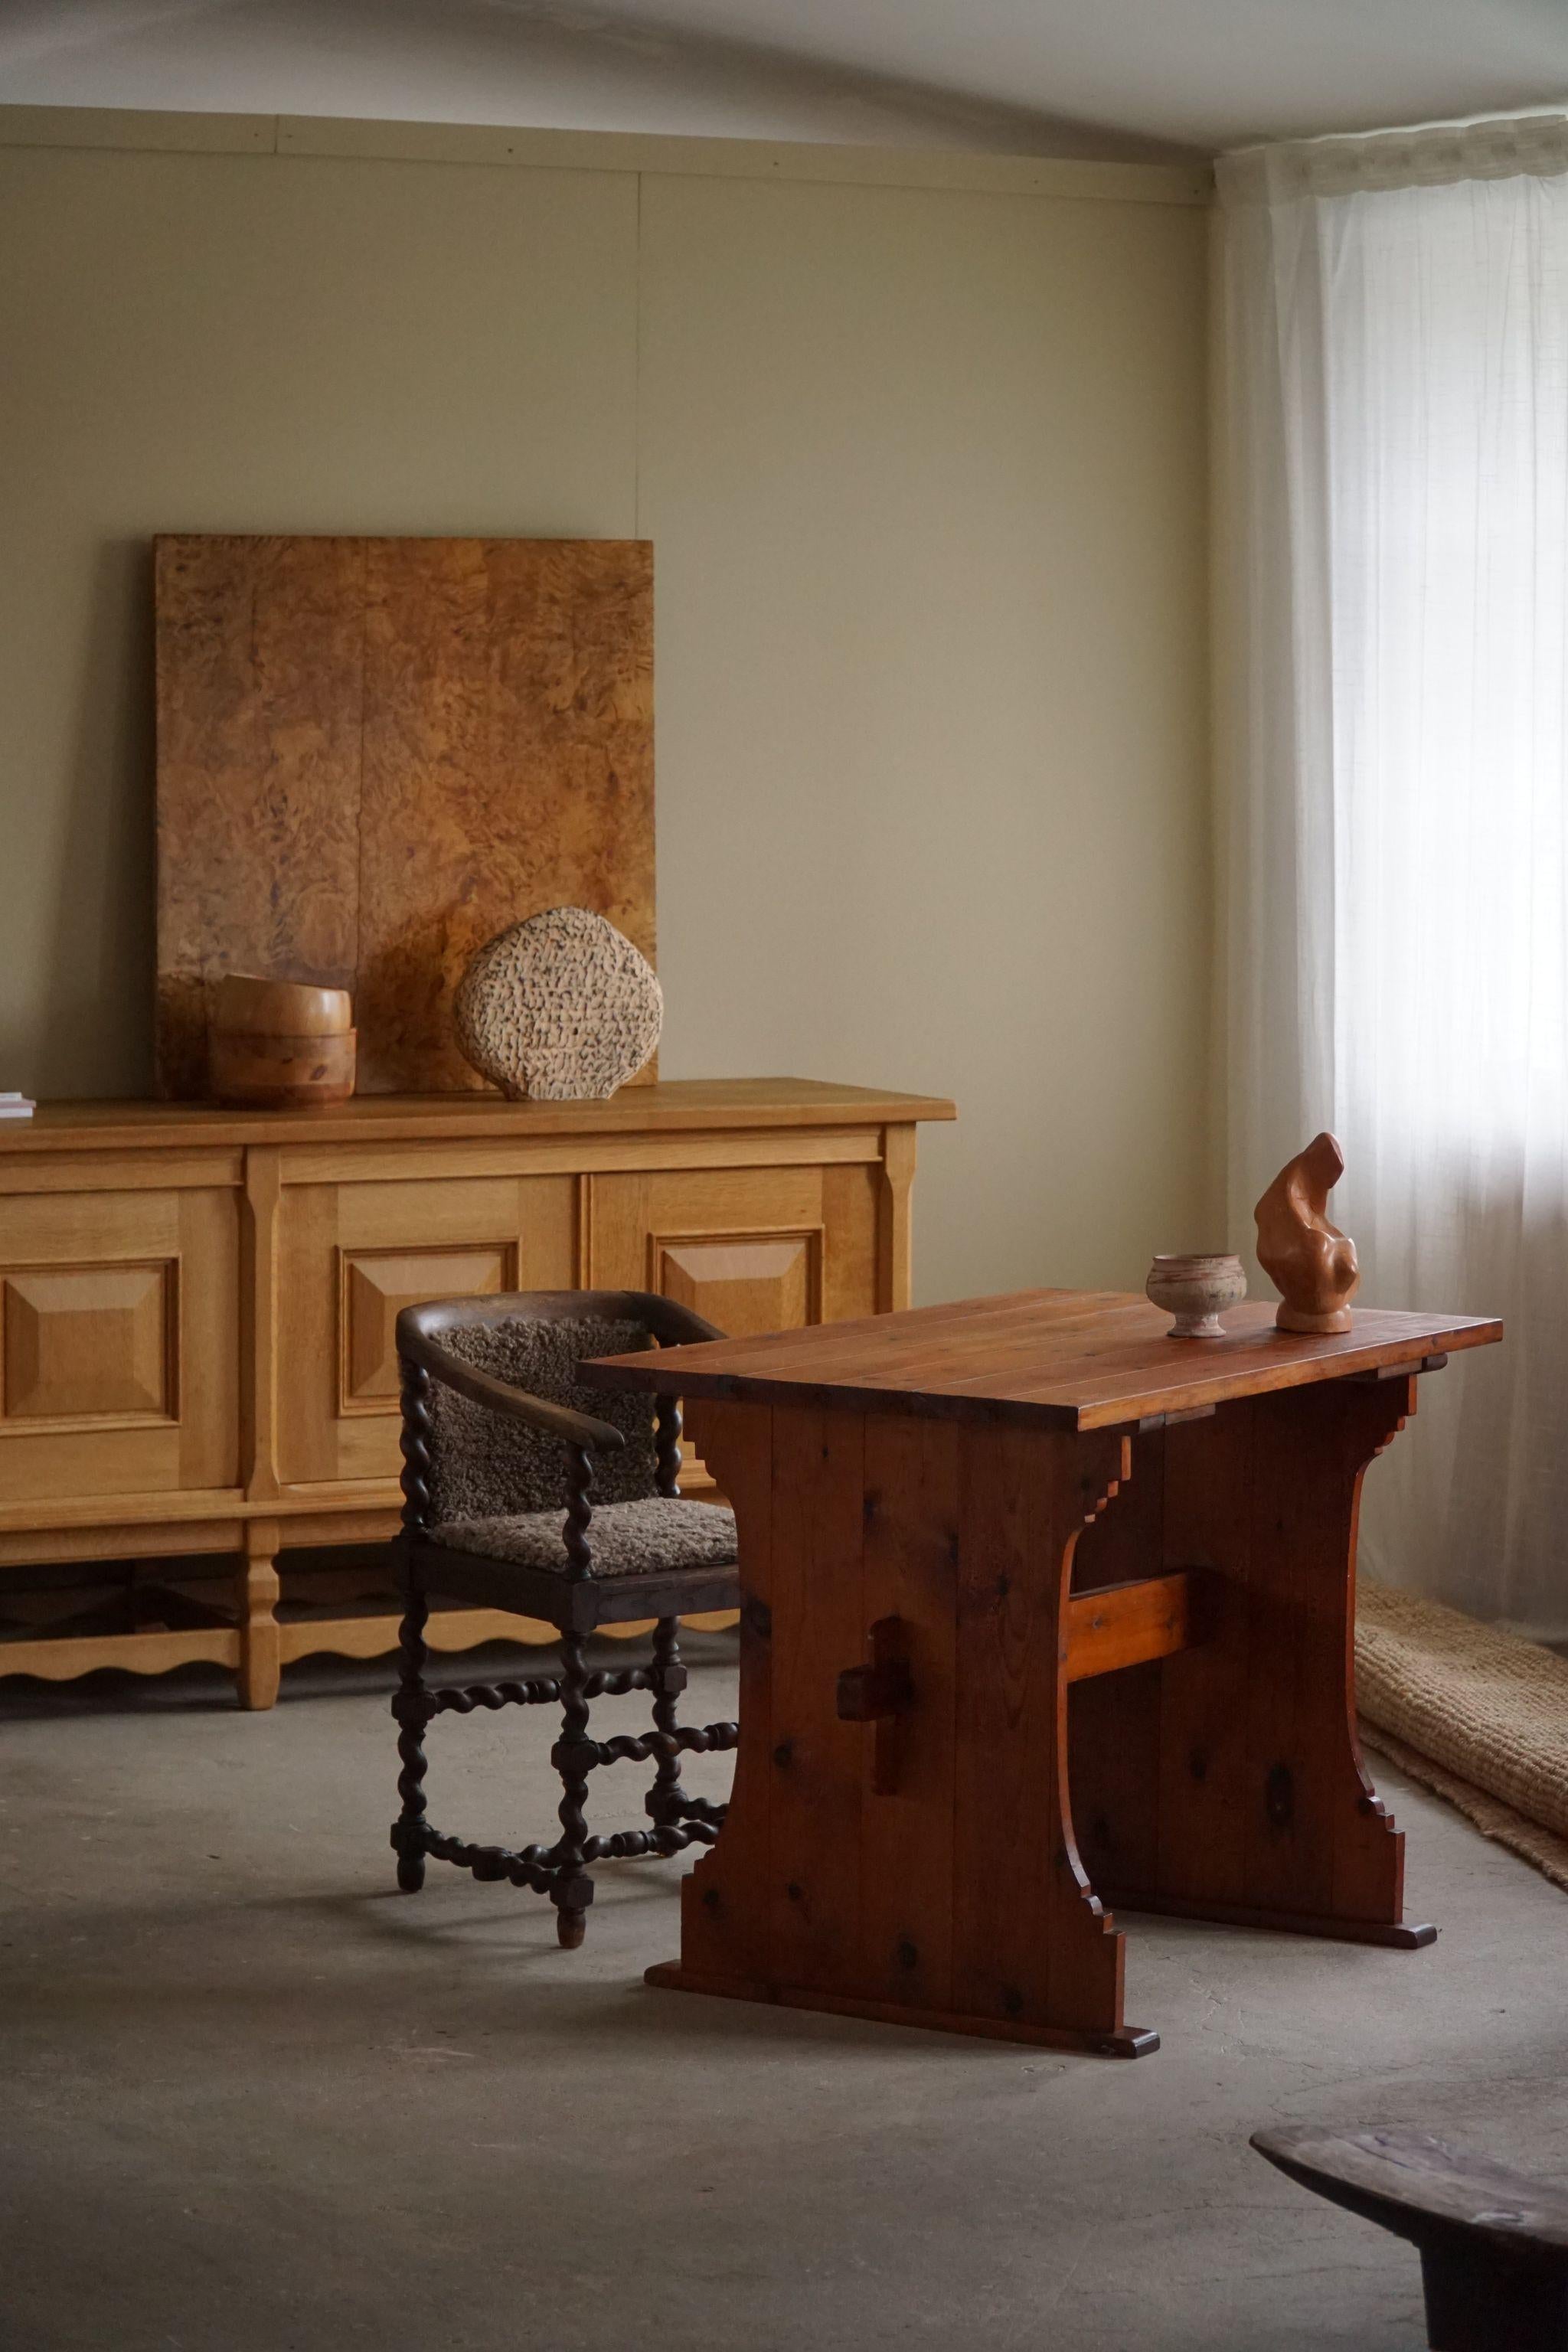 A charming pine desk, crafted by a Swedish cabinetmaker in the 1940s. The natural grain of the pine adds warmth and character to the desk, highlighting its authentic, time-worn appeal.
Similar to the Lovö series designed by Axel Einar Hjorth.

A